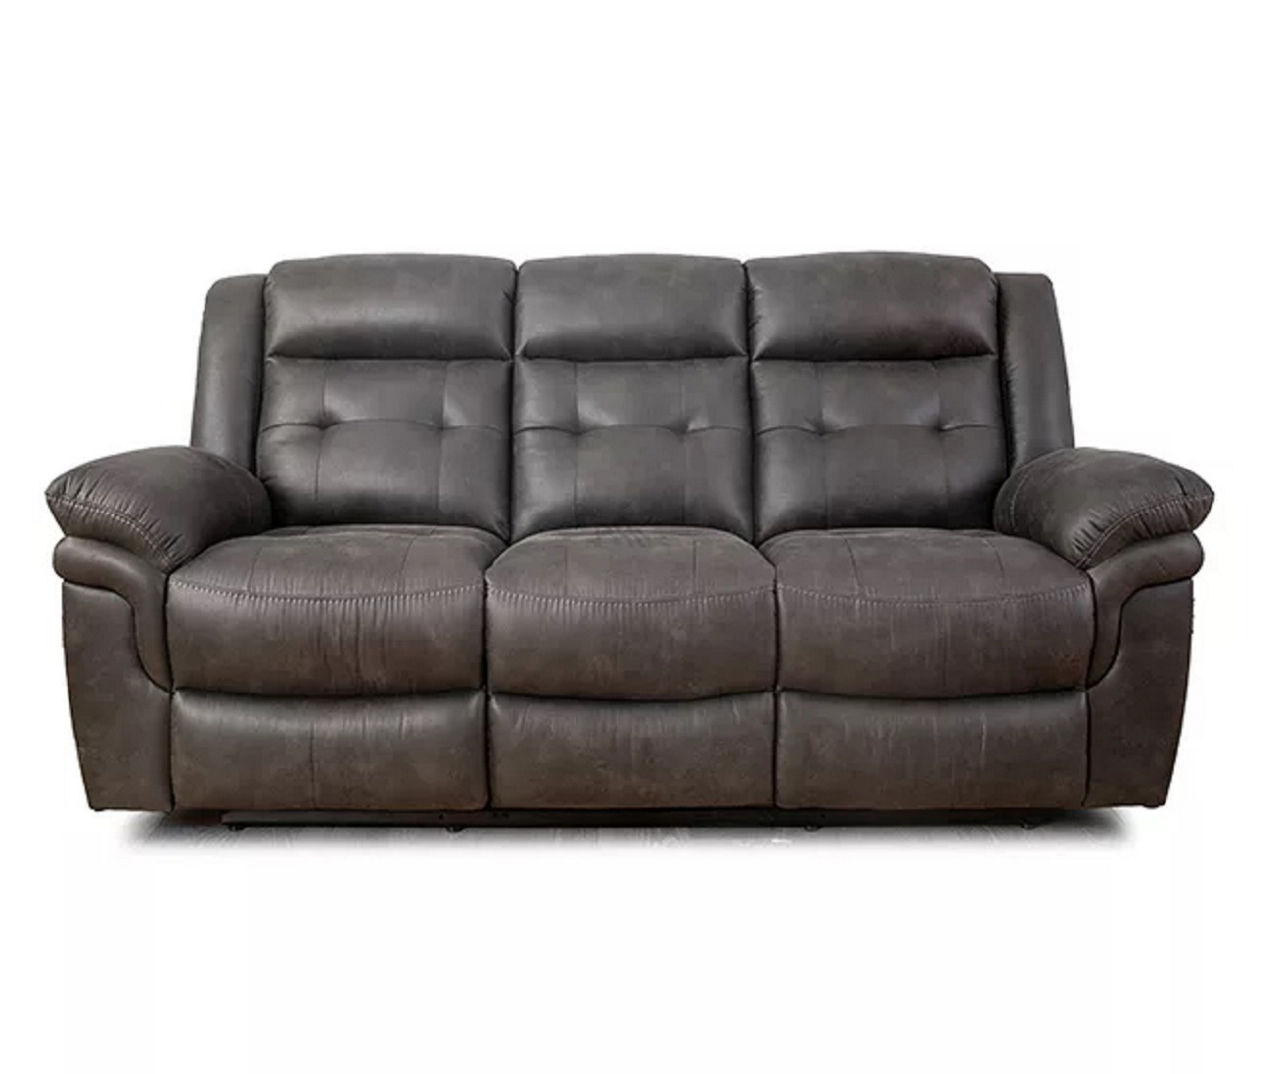 Find the Perfect Sofa or Couch For Your Living Room